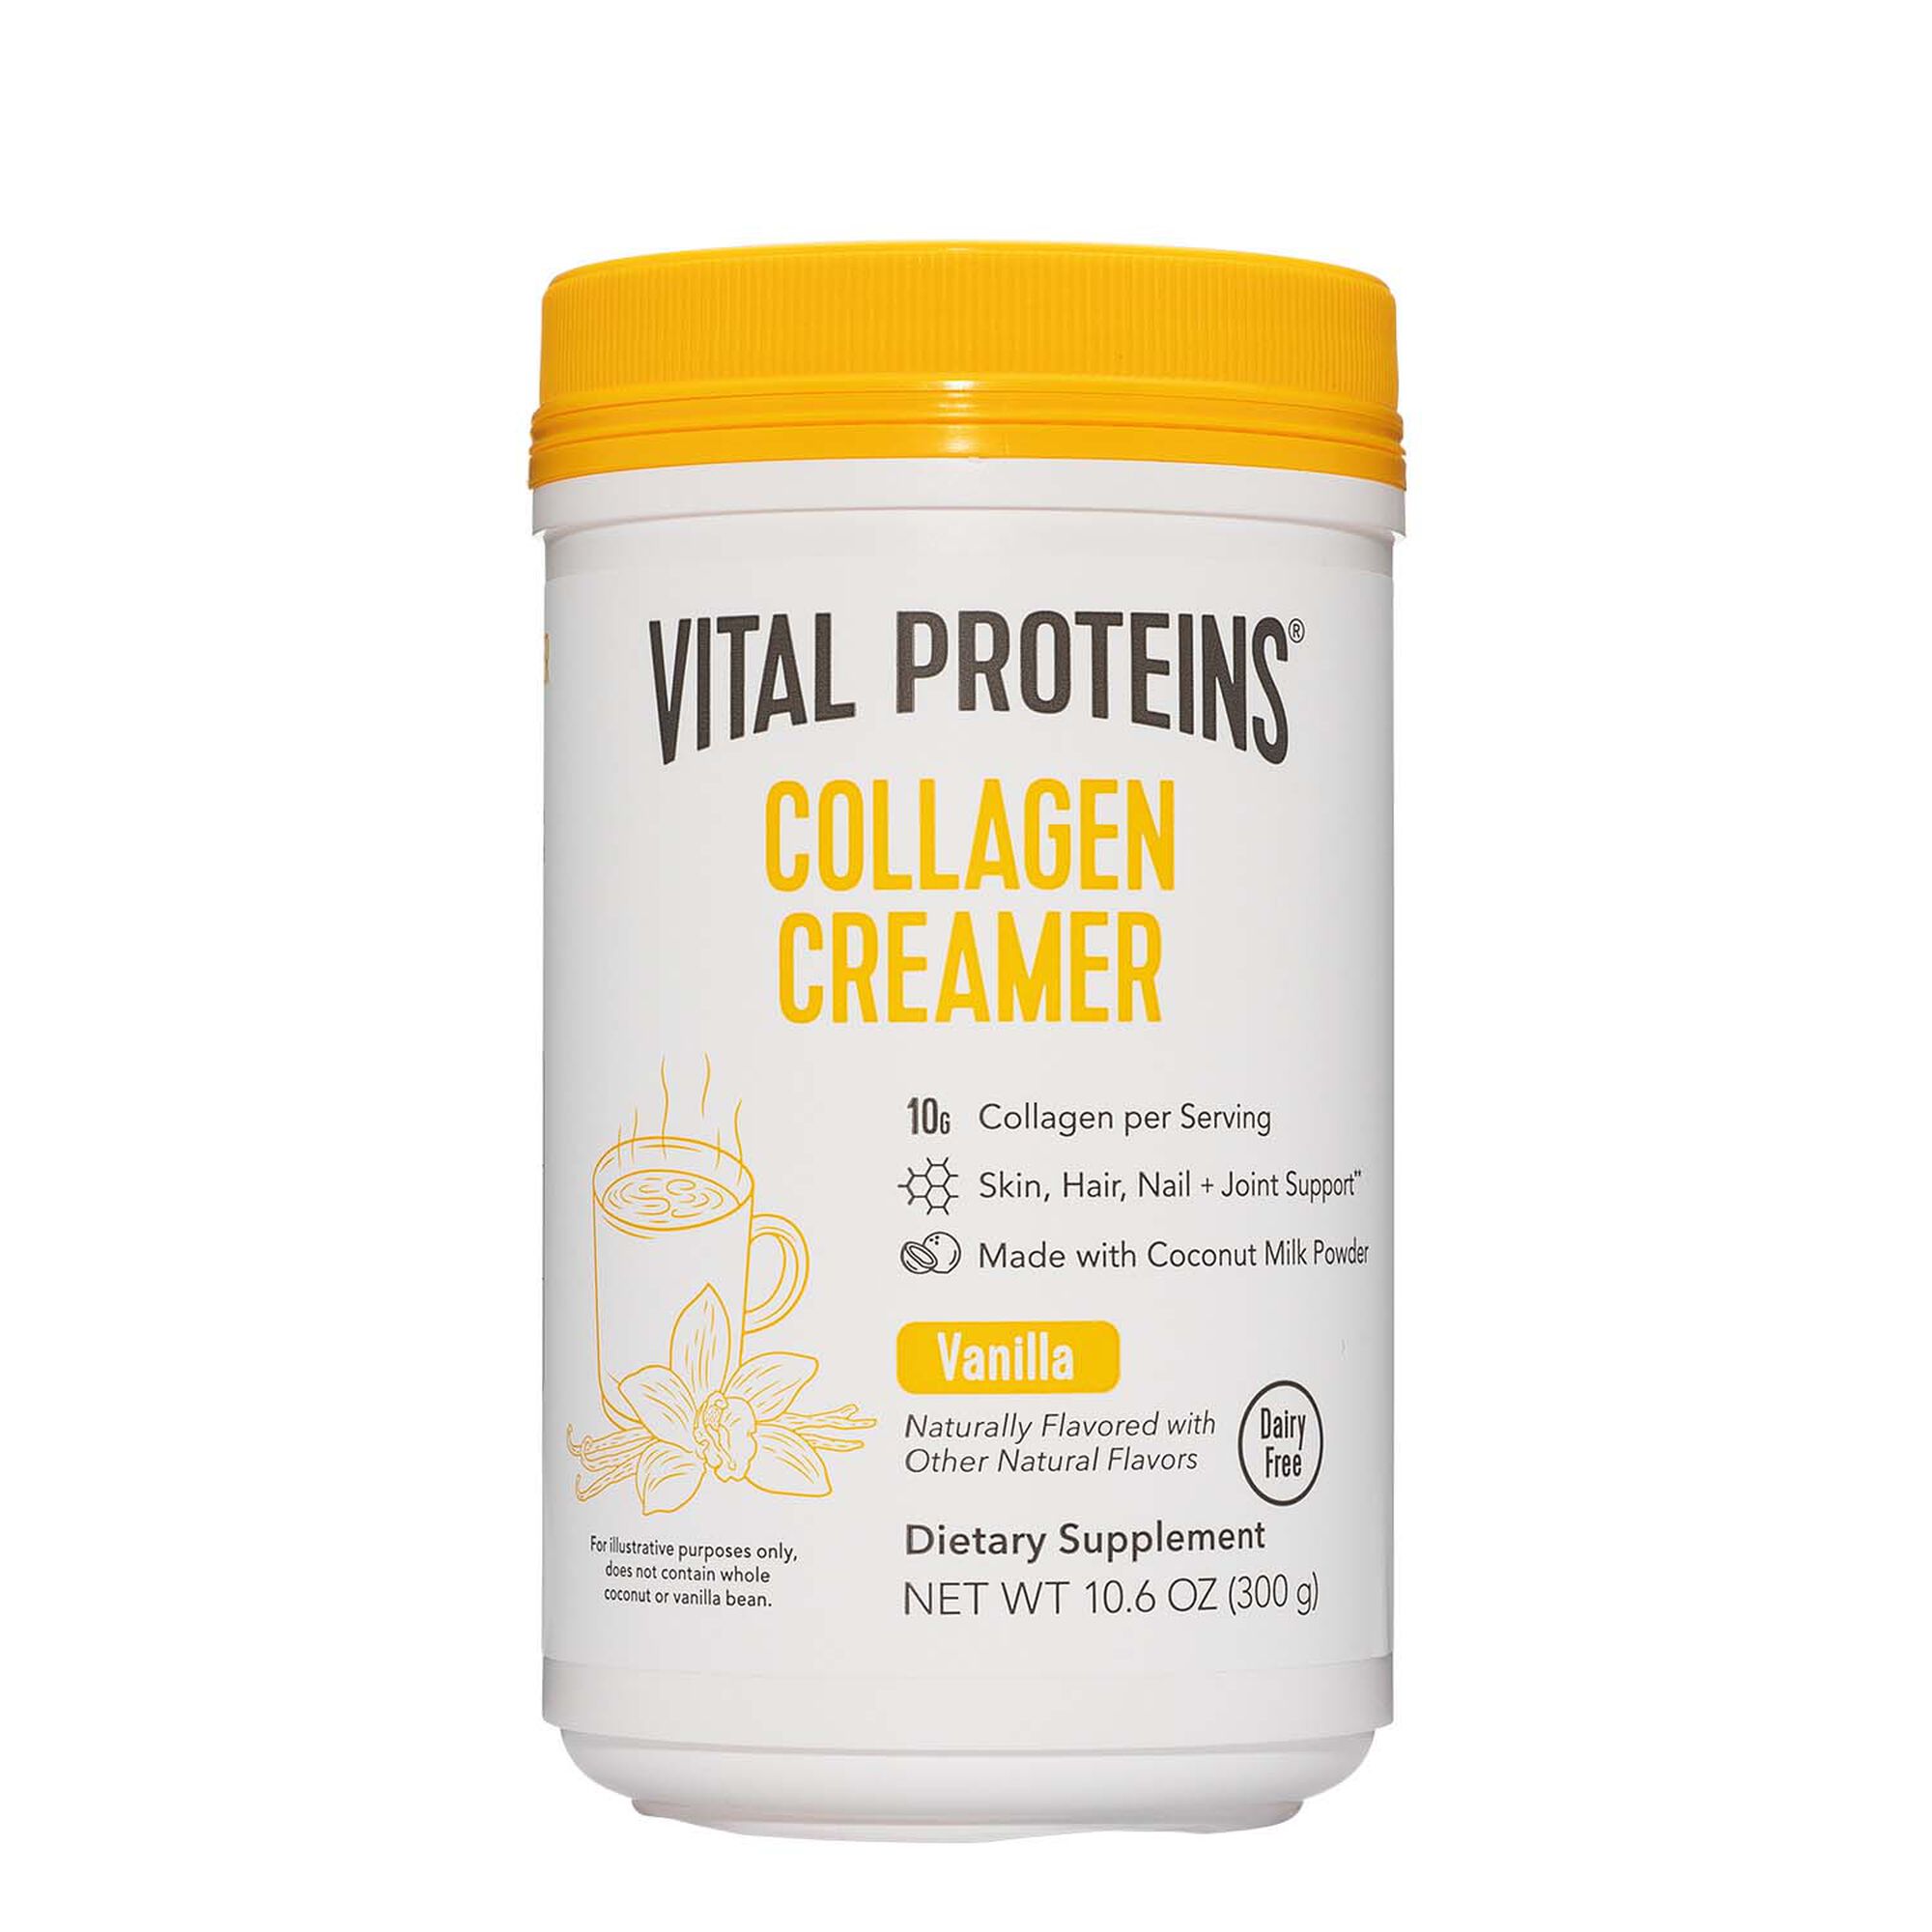 Vital Proteins Collagen Creamer Vanilla Gnc,How To Get Out Of The Friendzone With A Girl